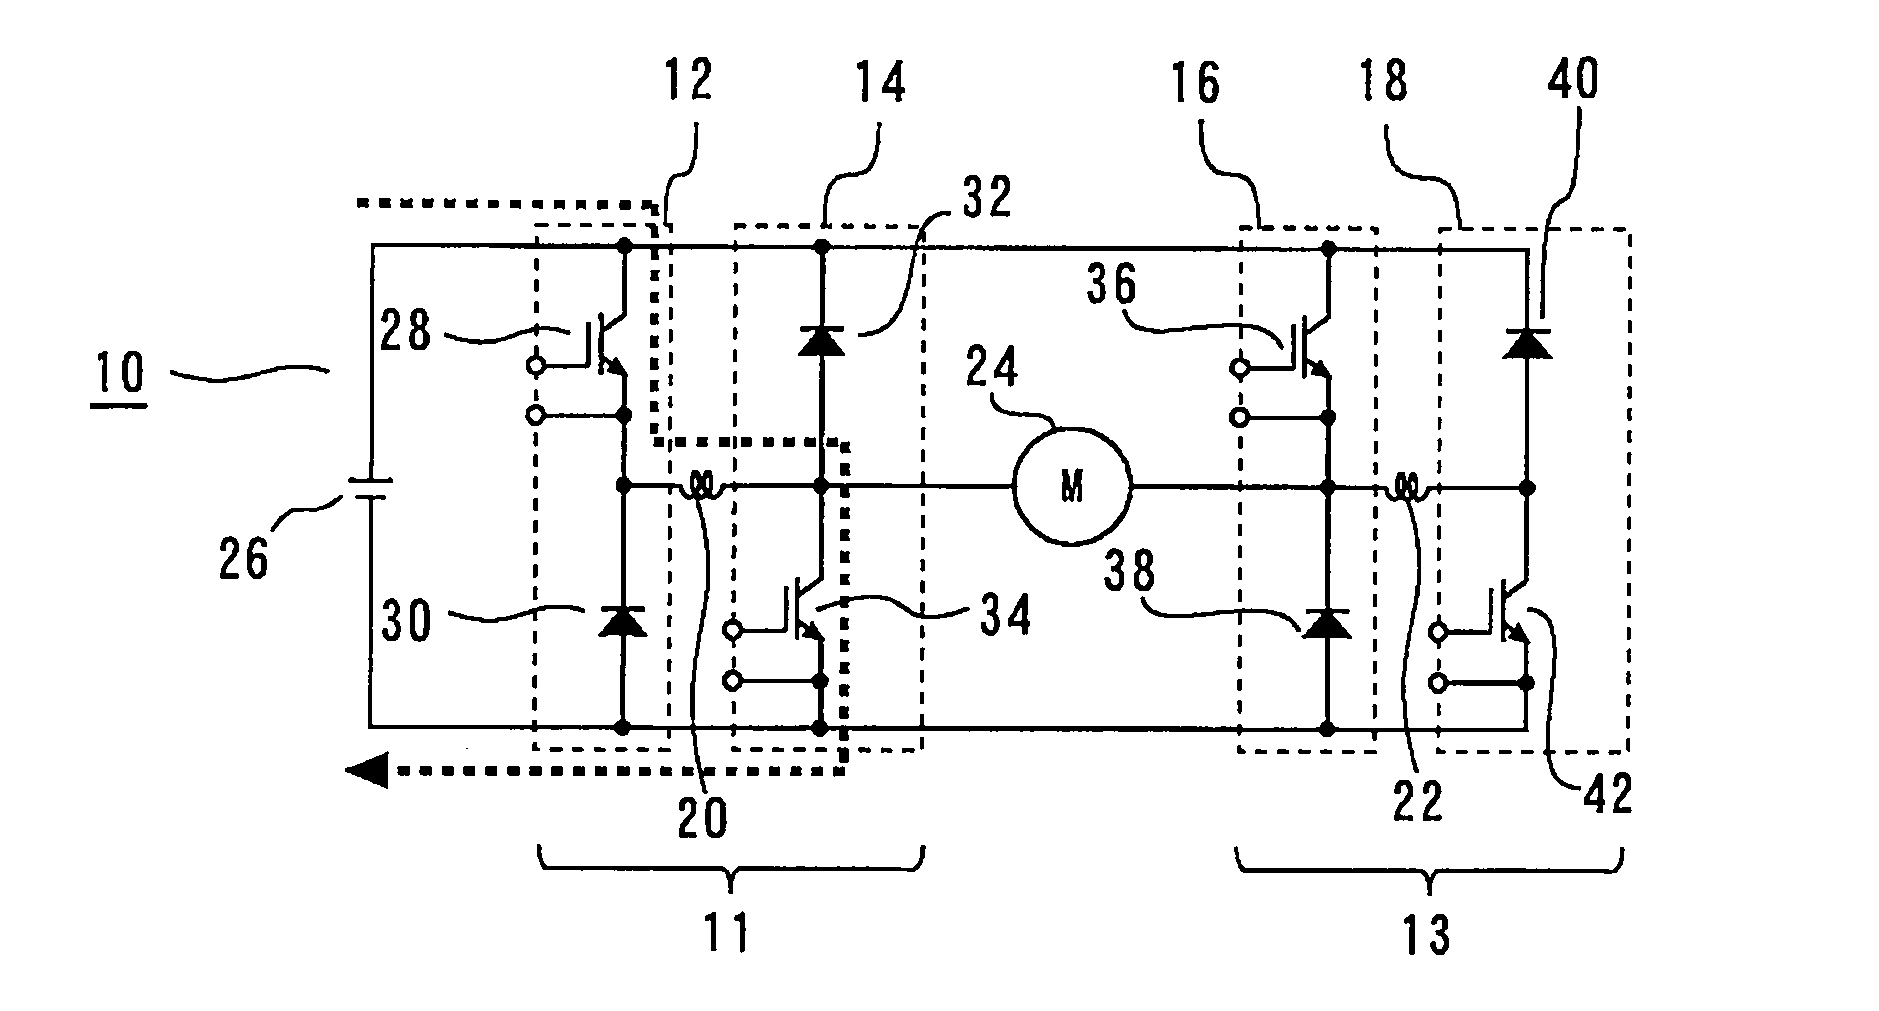 Semiconductor switching device